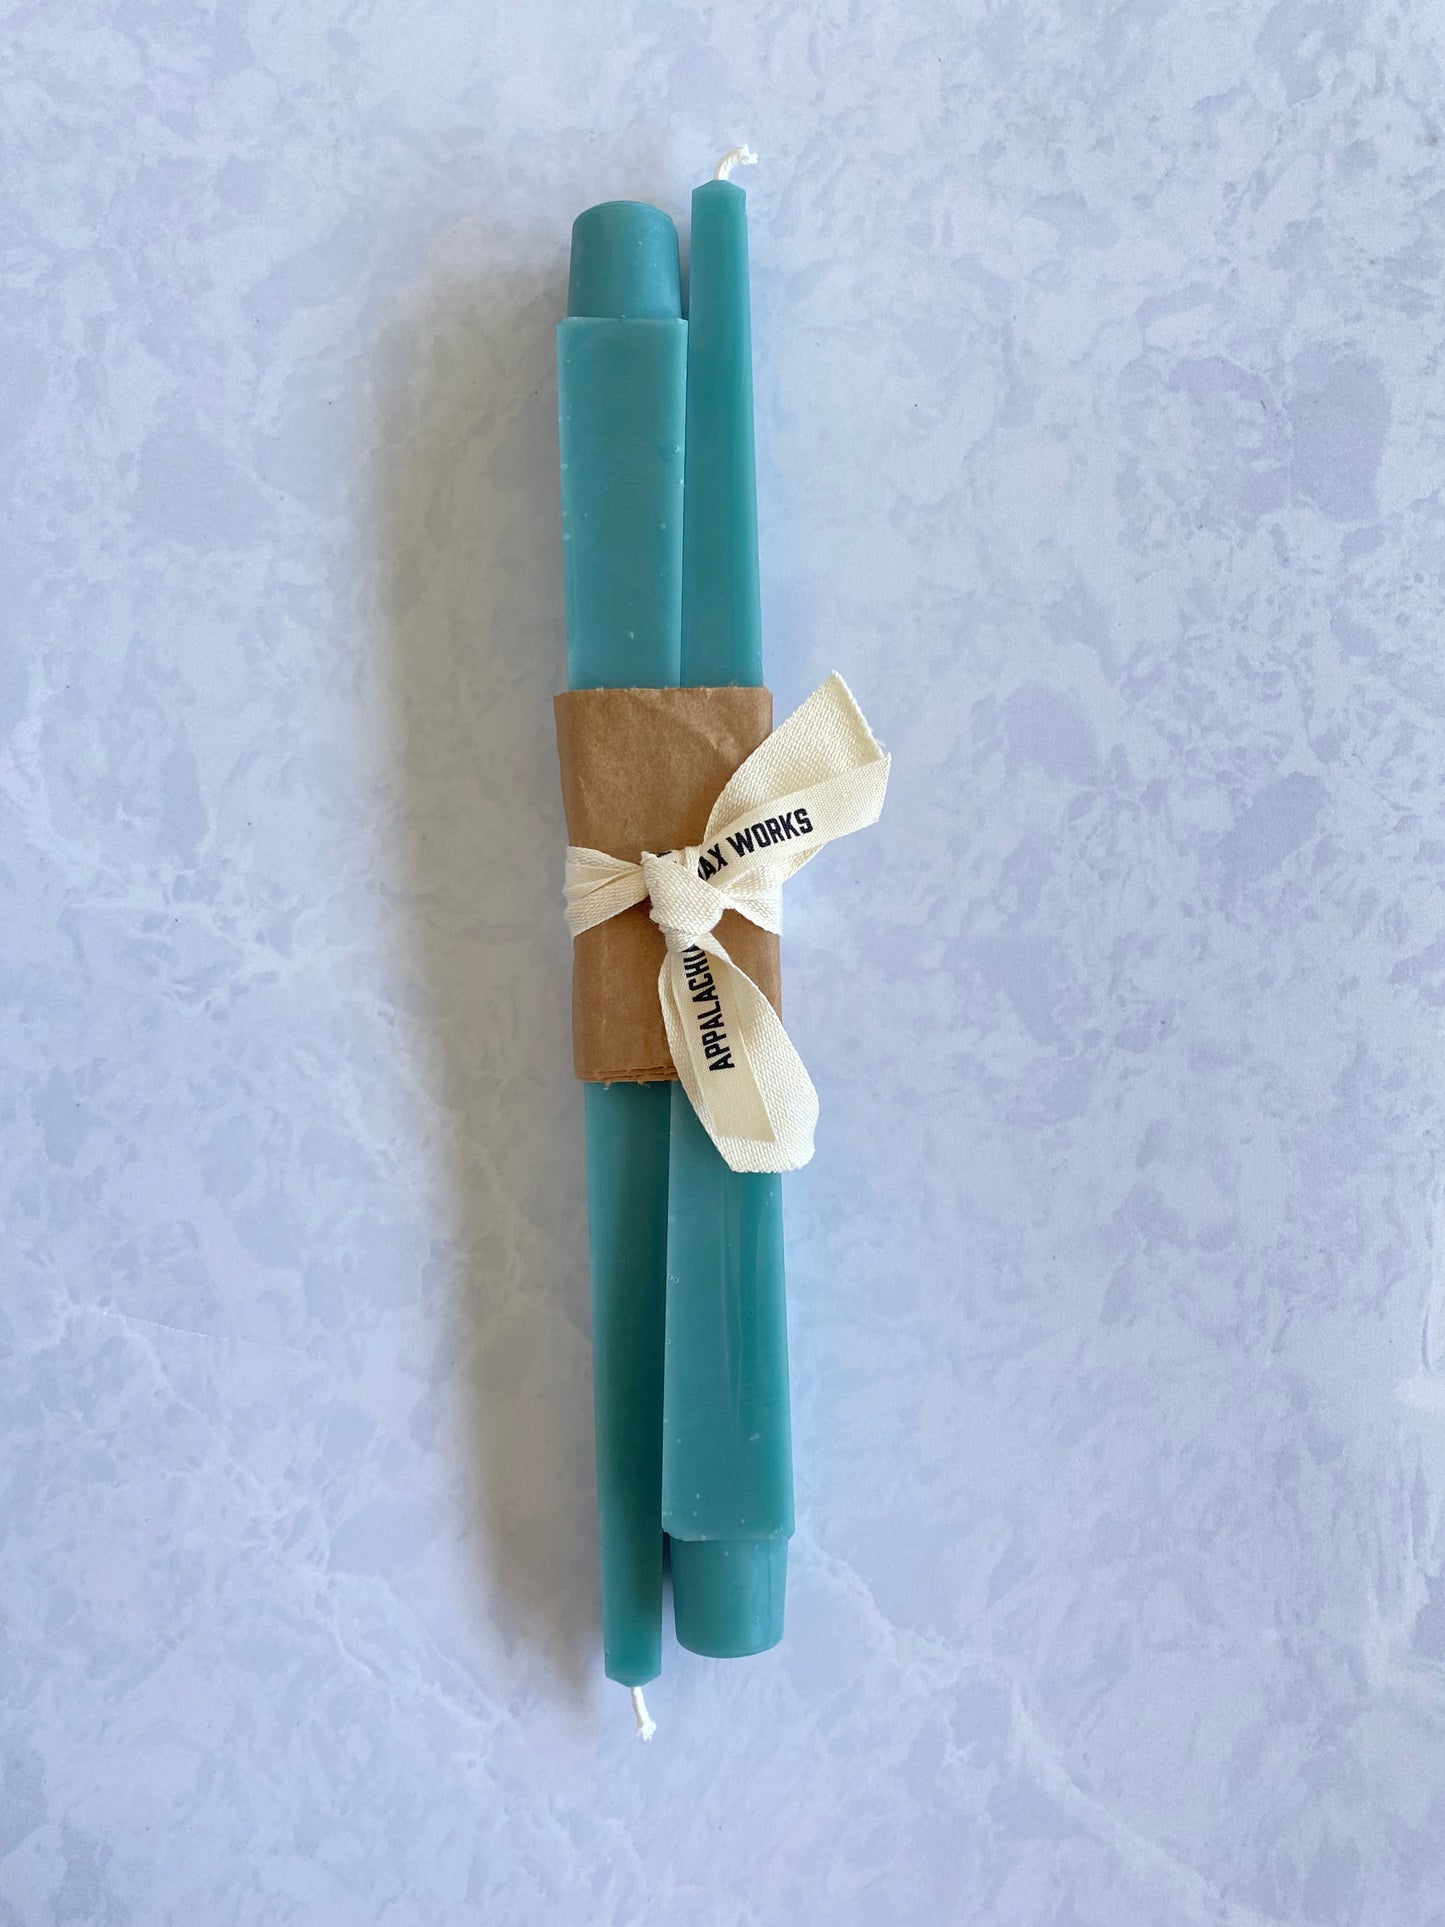 Square Beeswax Taper Candles in Teal Blue Color for Sale